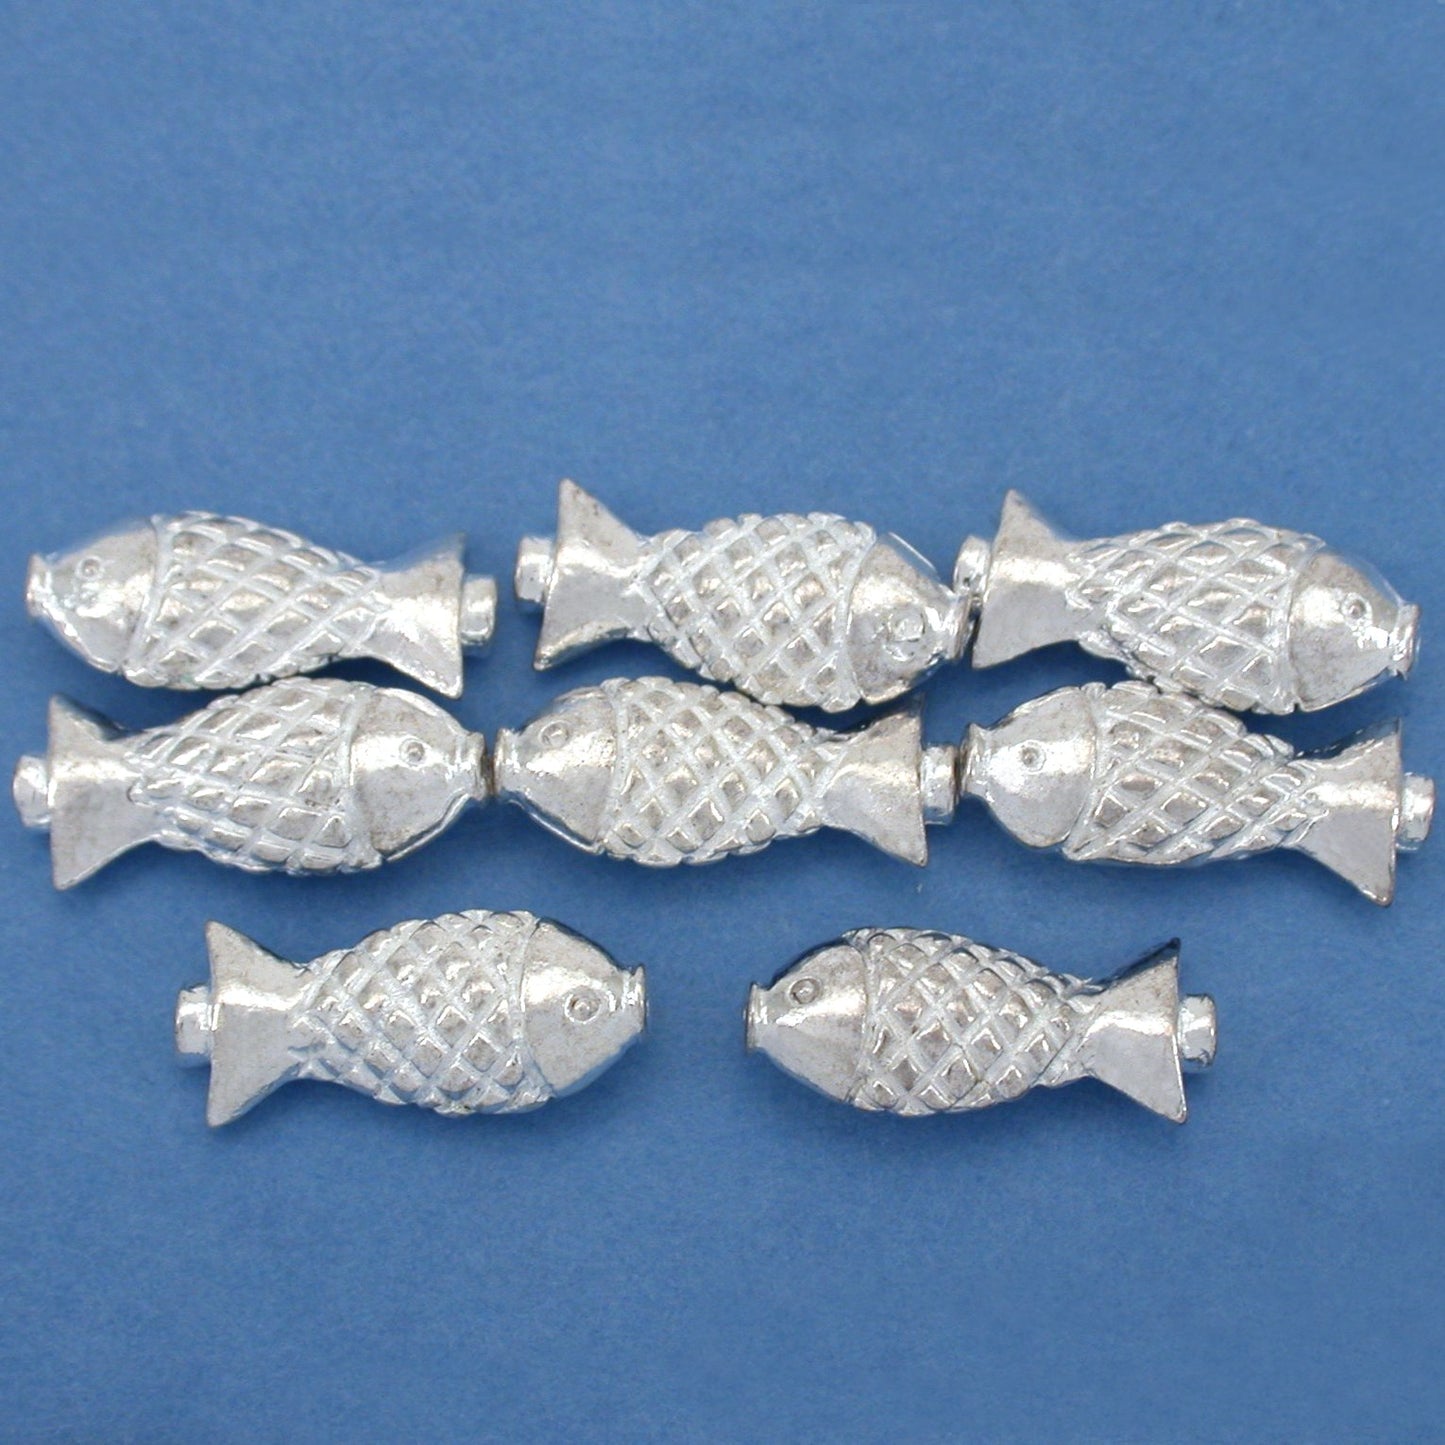 Fish Silver Plated Beads 18mm 15 Grams 8Pcs Approx.